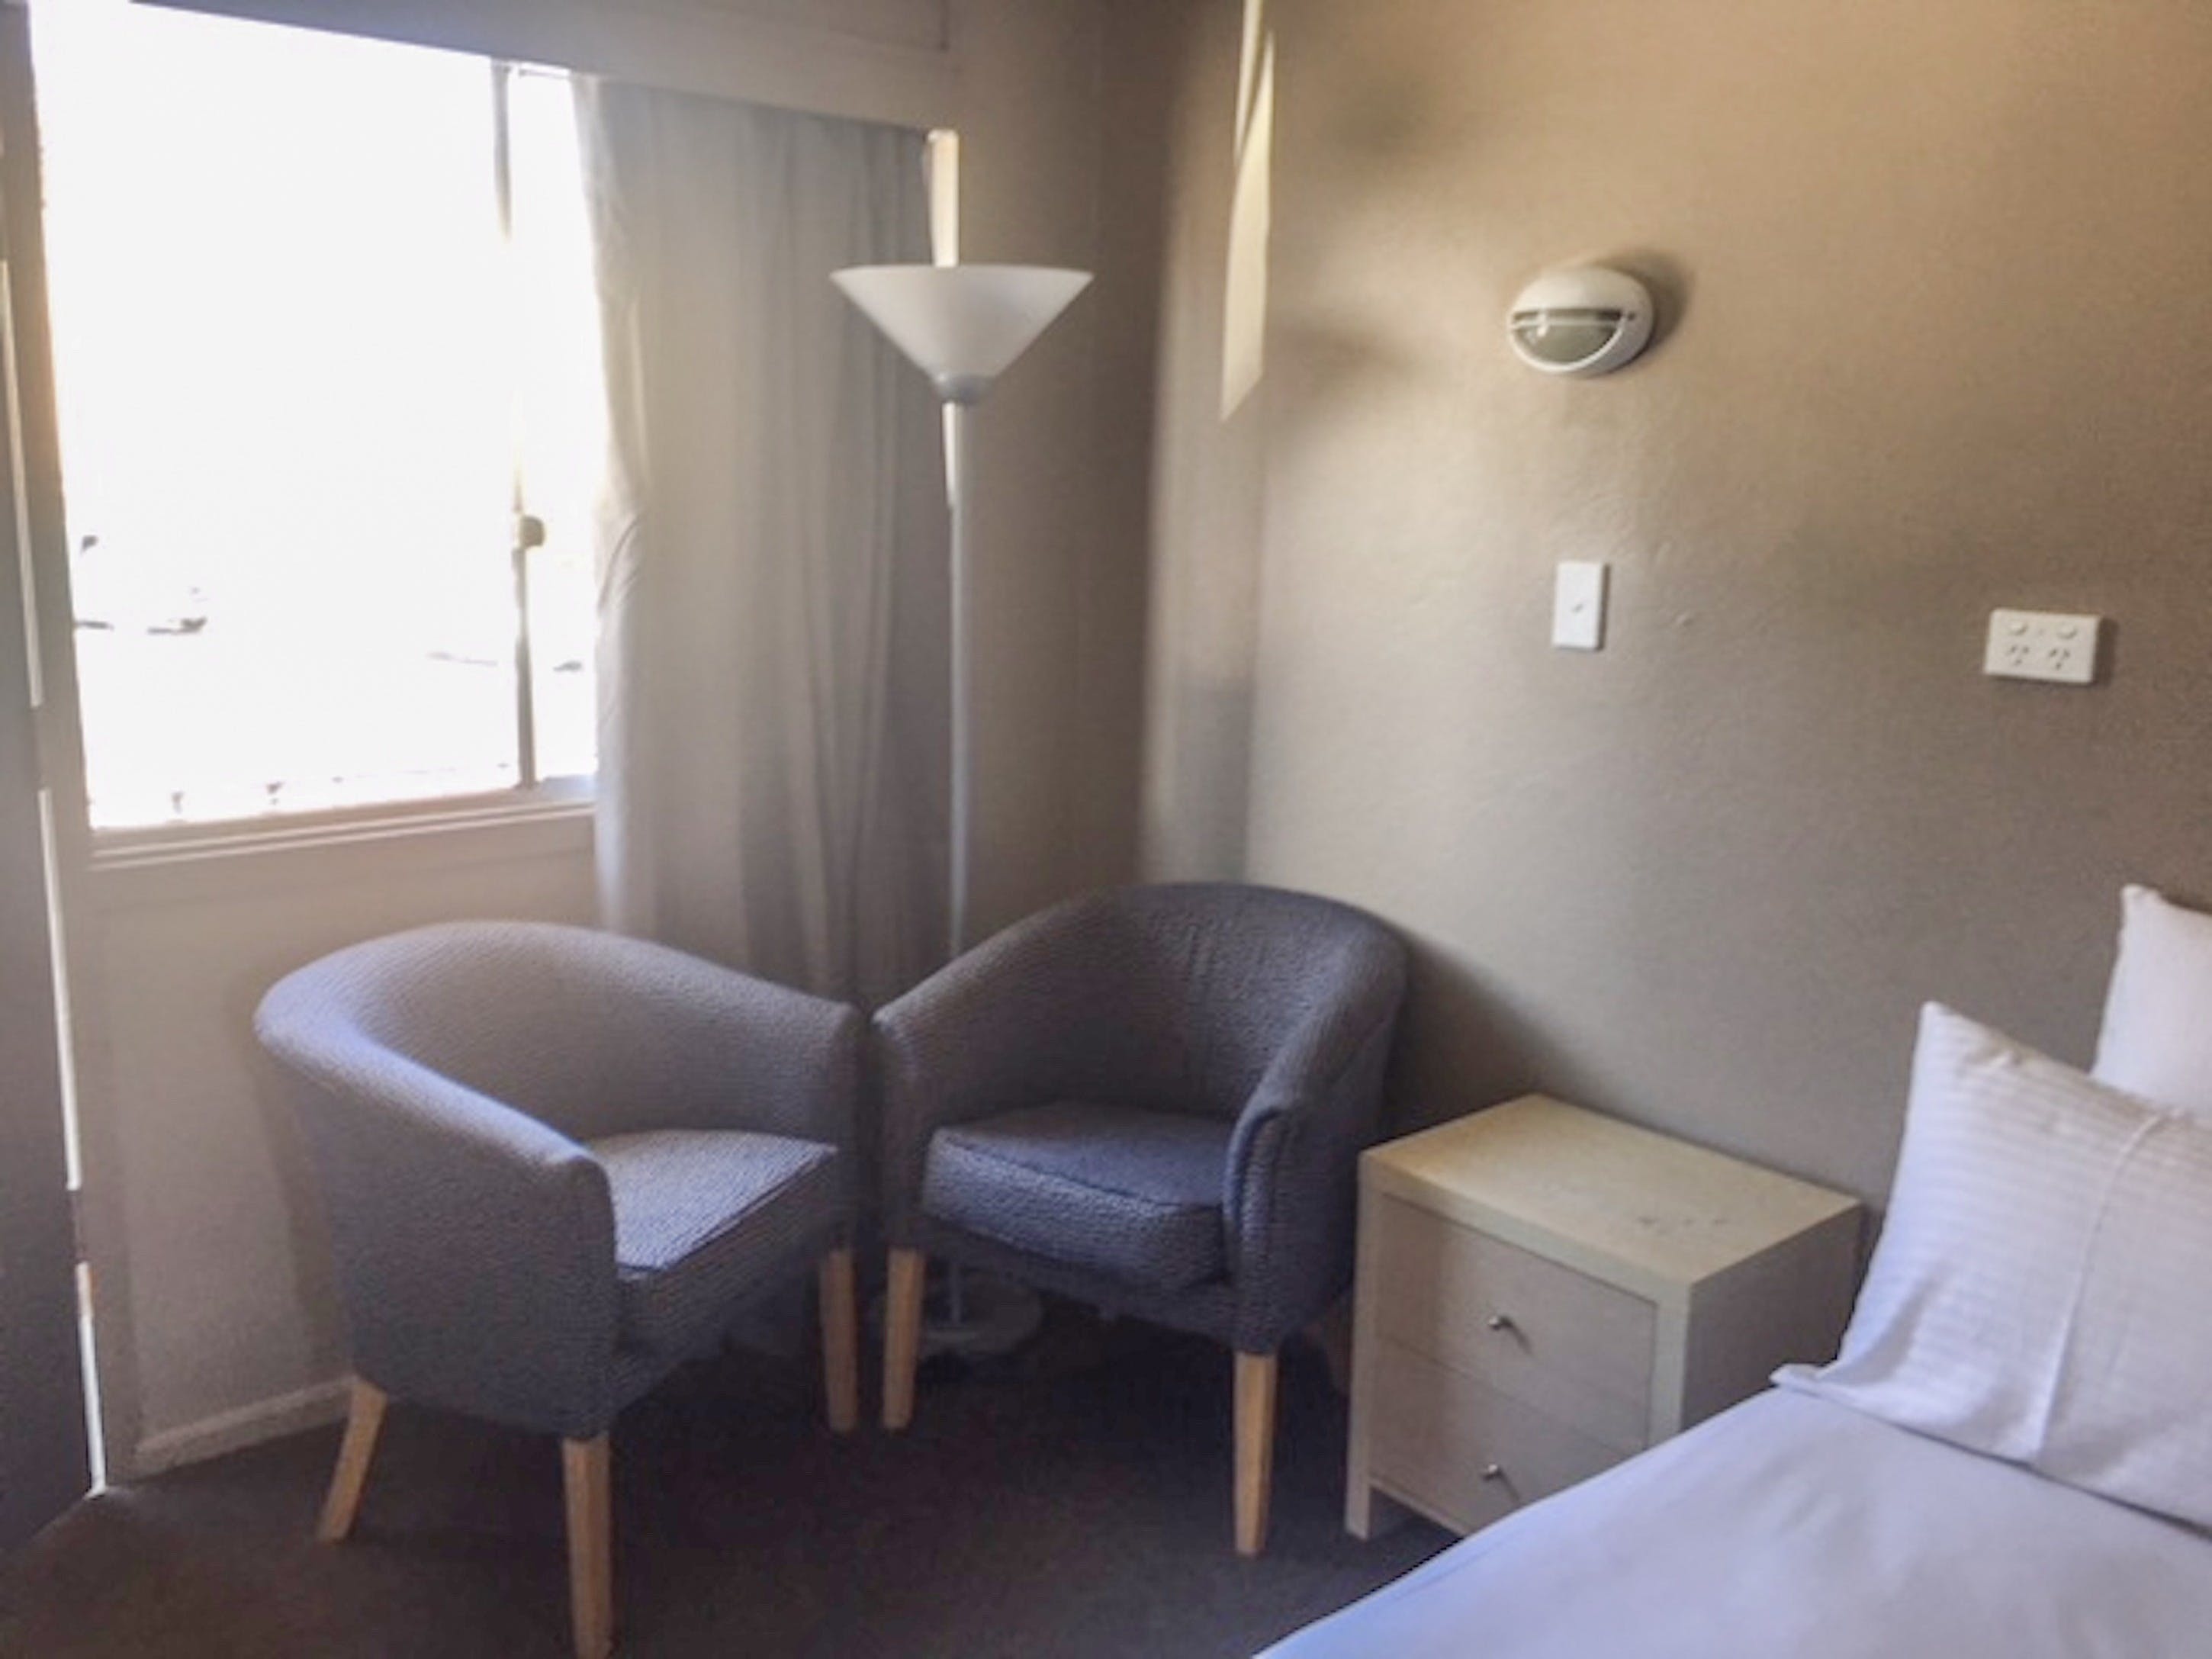 Commercial Hotel Motel Lithgow - Geraldton Accommodation